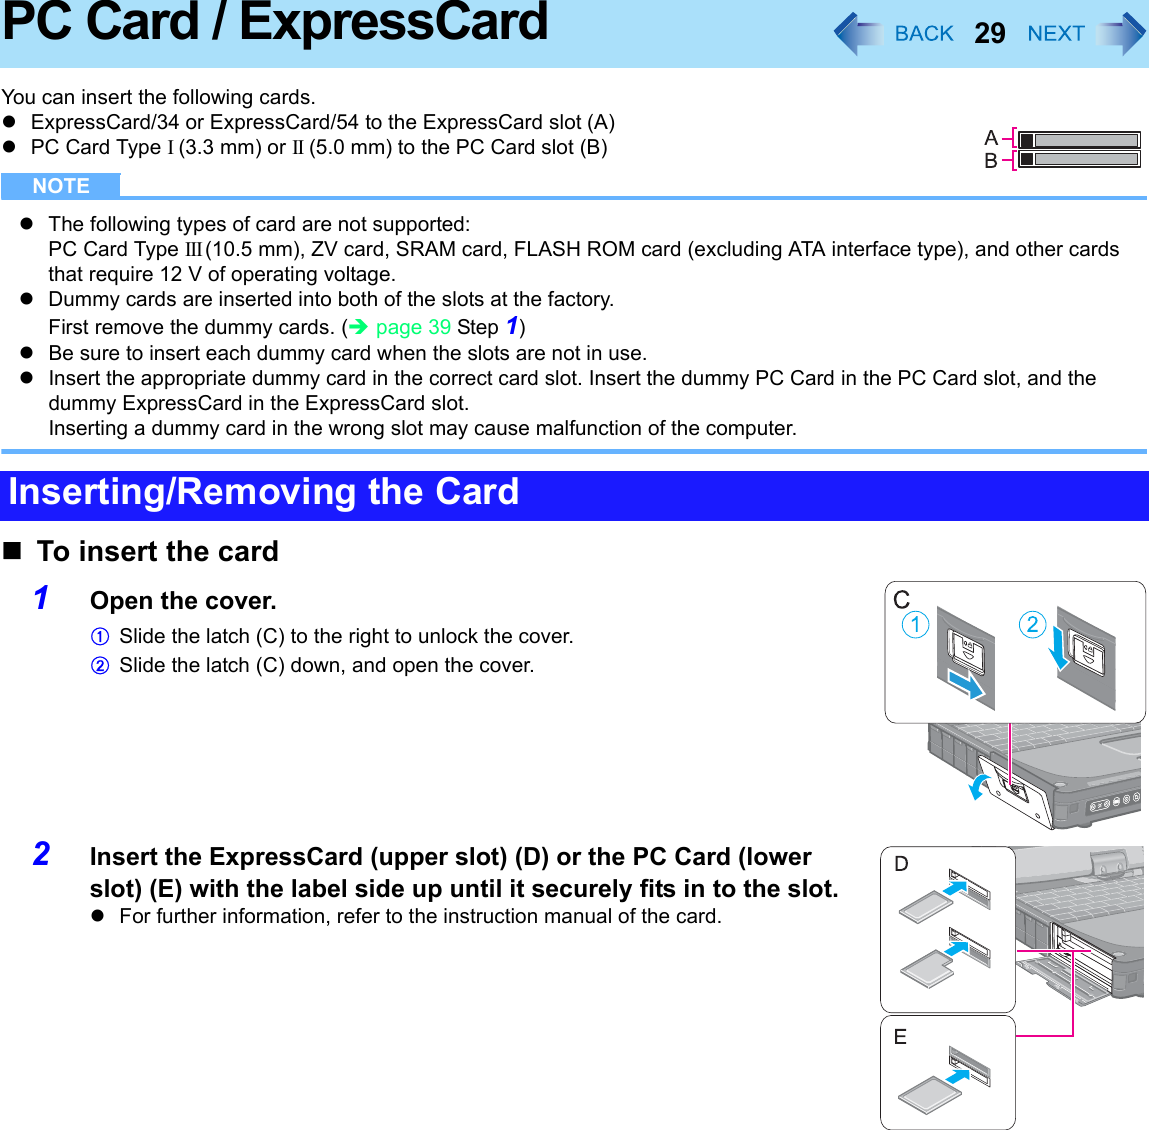 29PC Card / ExpressCardYou can insert the following cards.zExpressCard/34 or ExpressCard/54 to the ExpressCard slot (A)zPC Card Type I (3.3 mm) or II (5.0 mm) to the PC Card slot (B)NOTEzThe following types of card are not supported: PC Card Type III (10.5 mm), ZV card, SRAM card, FLASH ROM card (excluding ATA interface type), and other cards that require 12 V of operating voltage.zDummy cards are inserted into both of the slots at the factory.First remove the dummy cards. (Îpage 39 Step 1)zBe sure to insert each dummy card when the slots are not in use.zInsert the appropriate dummy card in the correct card slot. Insert the dummy PC Card in the PC Card slot, and the dummy ExpressCard in the ExpressCard slot.Inserting a dummy card in the wrong slot may cause malfunction of the computer.To insert the card1Open the cover.ASlide the latch (C) to the right to unlock the cover.BSlide the latch (C) down, and open the cover.2Insert the ExpressCard (upper slot) (D) or the PC Card (lower slot) (E) with the label side up until it securely fits in to the slot.zFor further information, refer to the instruction manual of the card.Inserting/Removing the Card